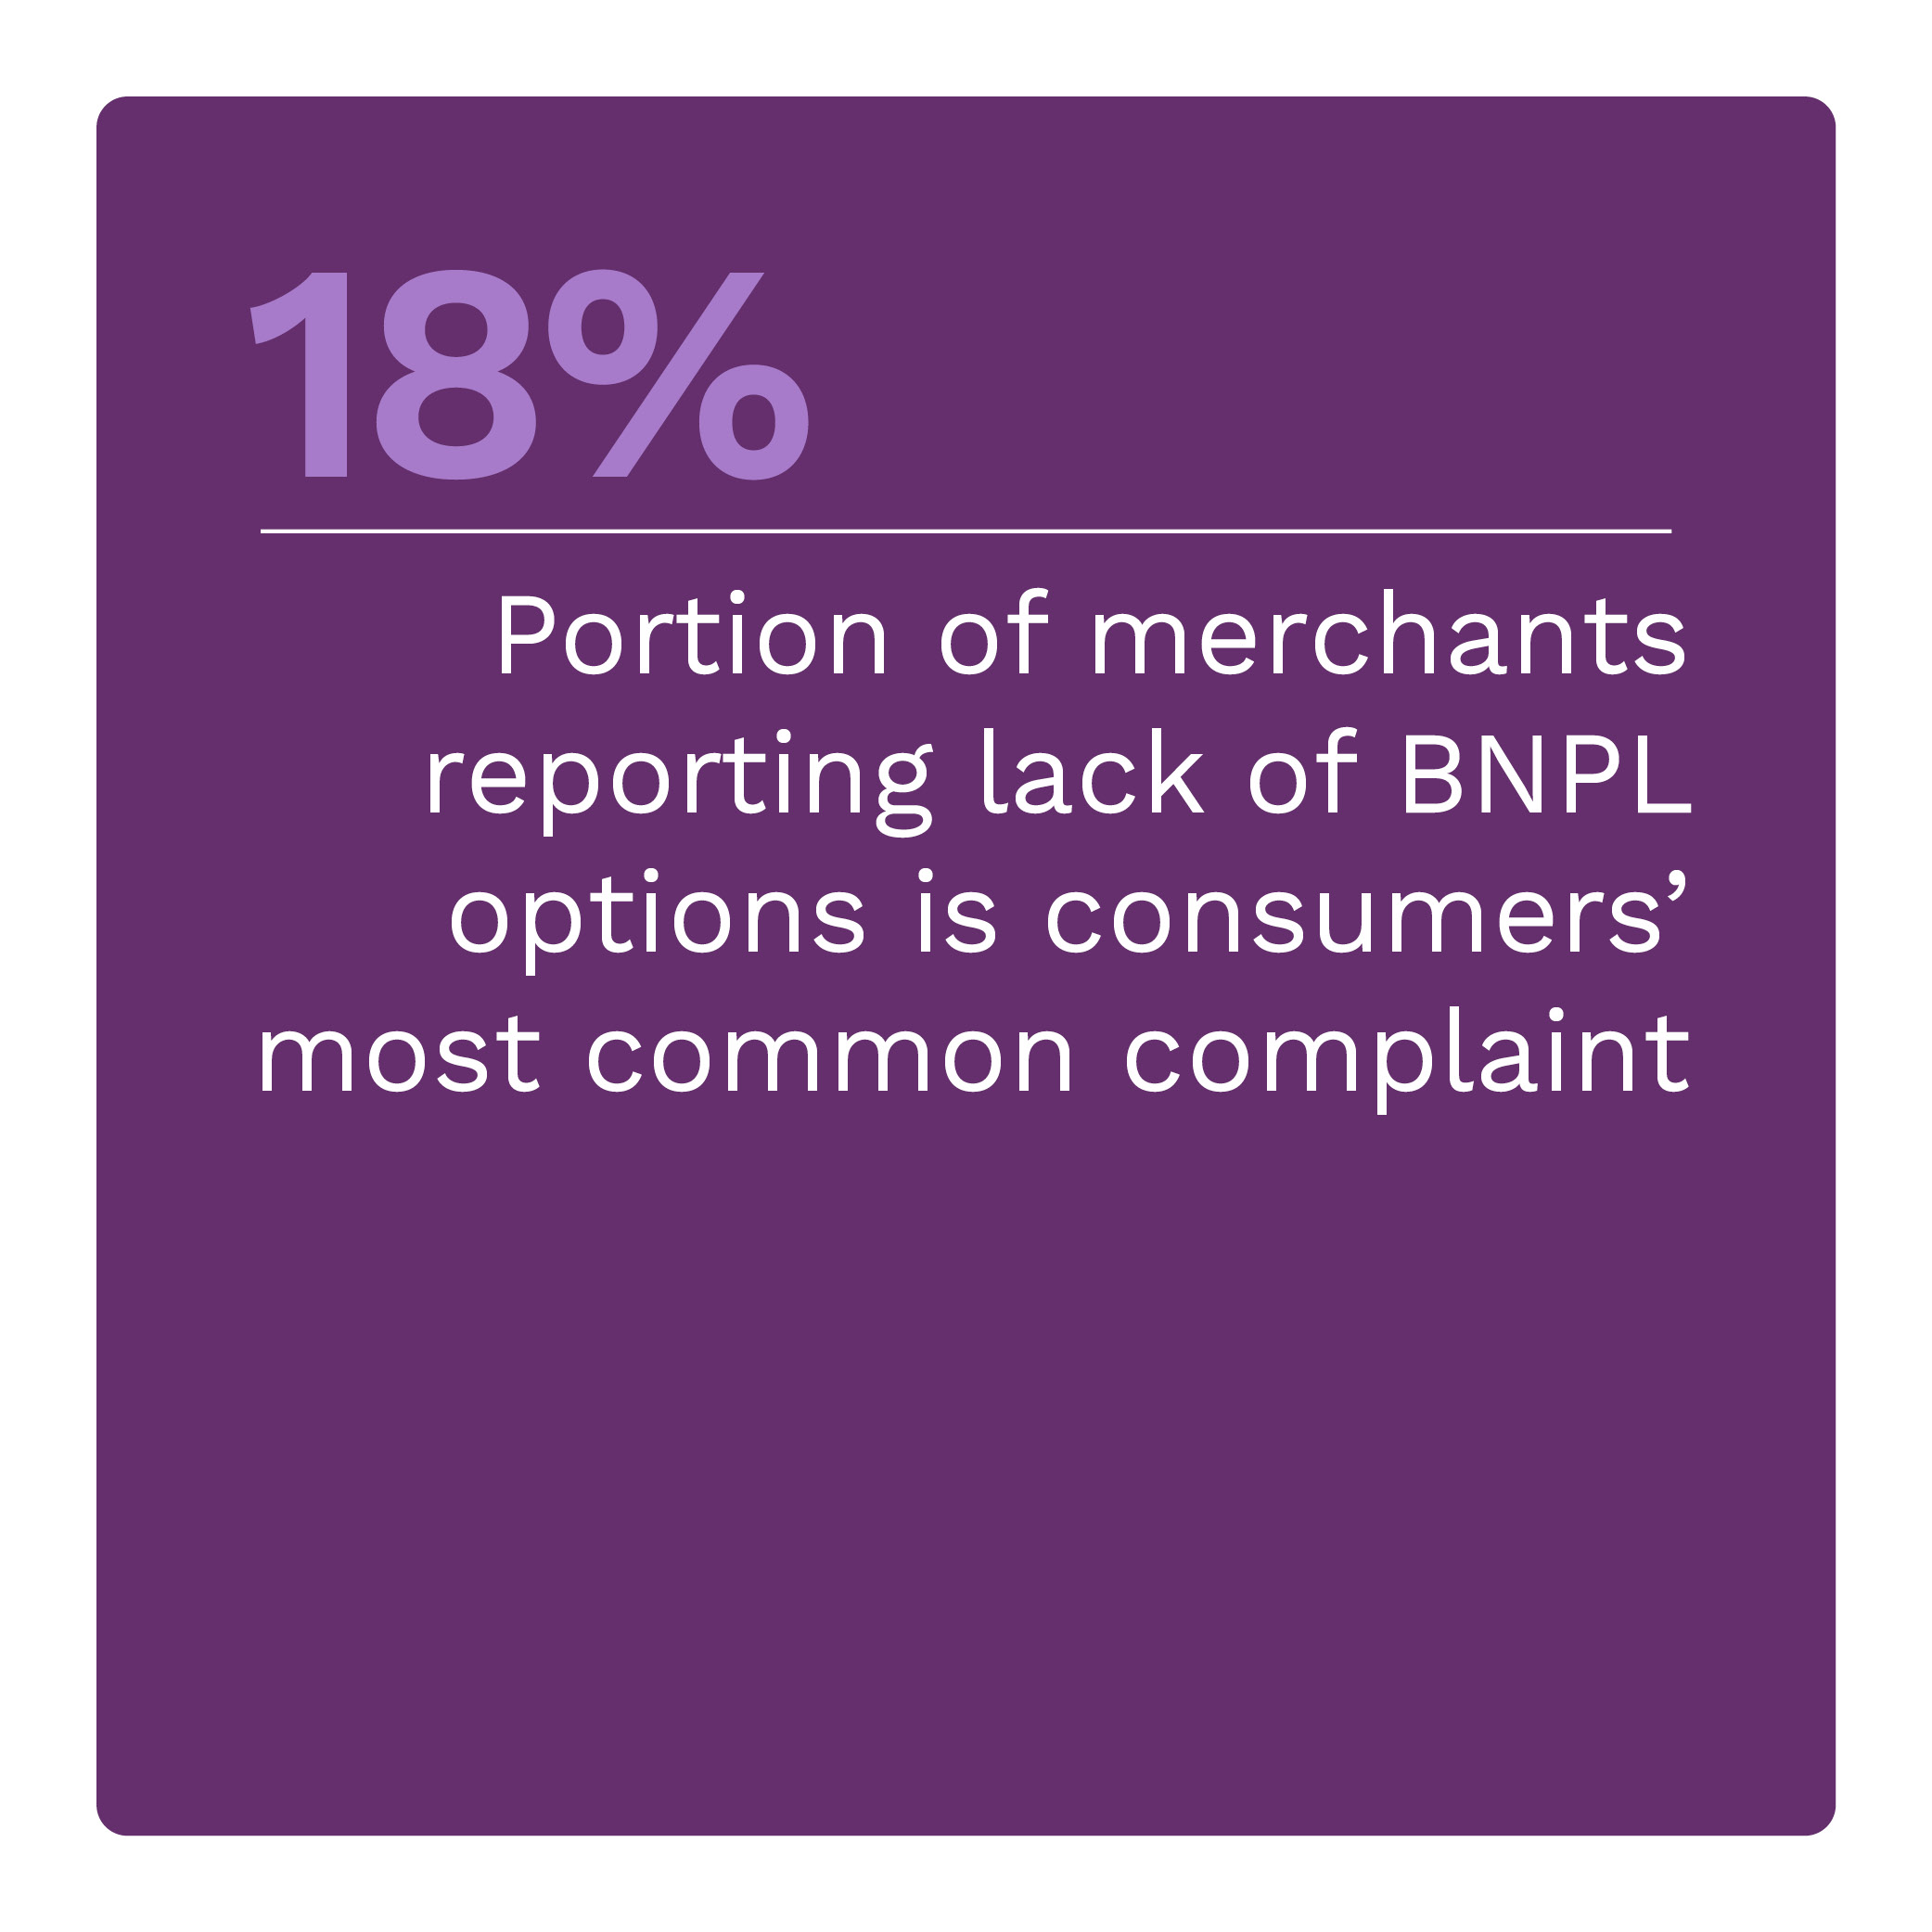 18%: Portion of merchants reporting lack of BNPL options is consumers’ most common complaint